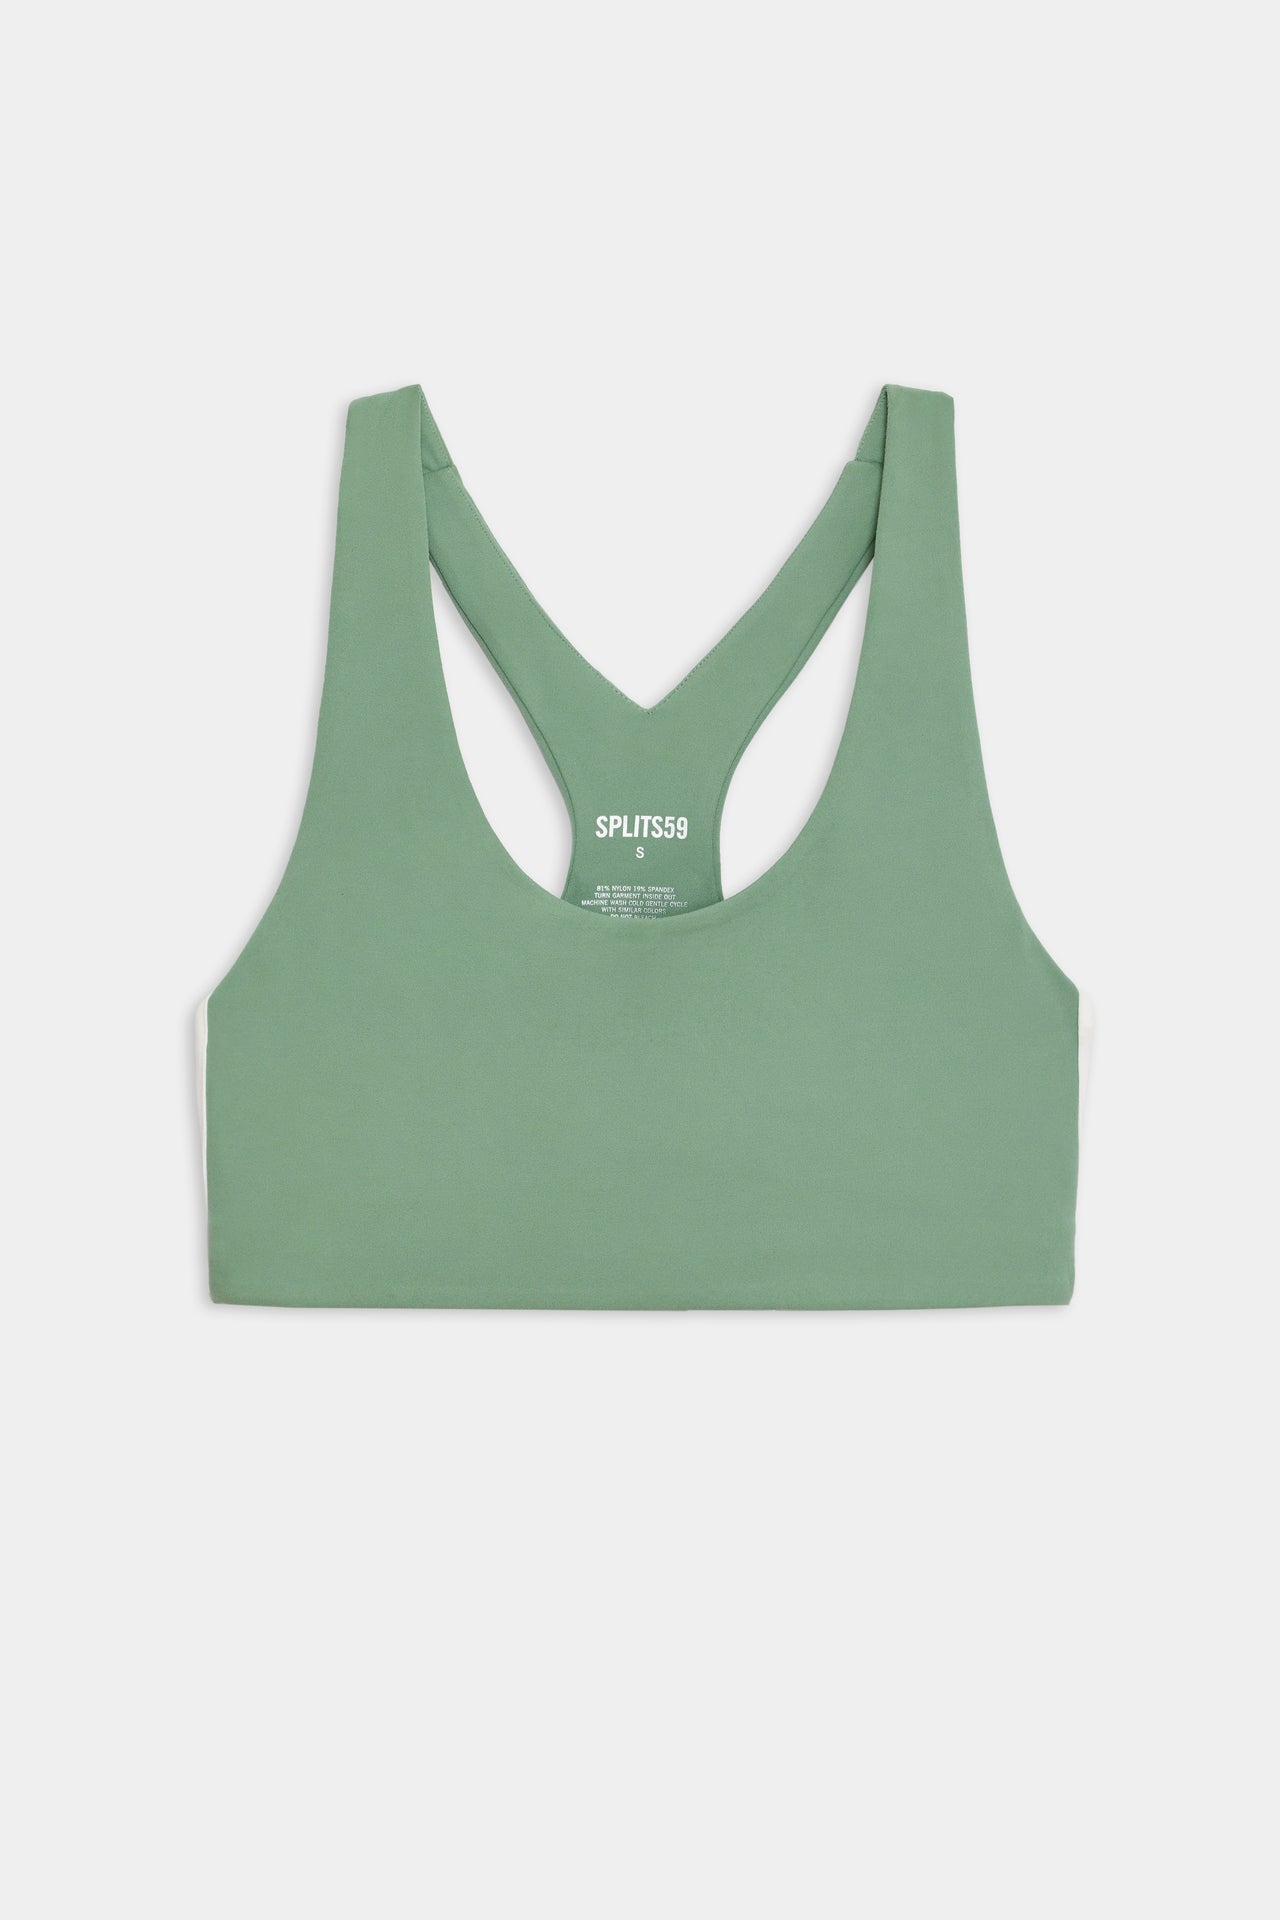 Flat view of light green sports bra with two thin white stripes down the side